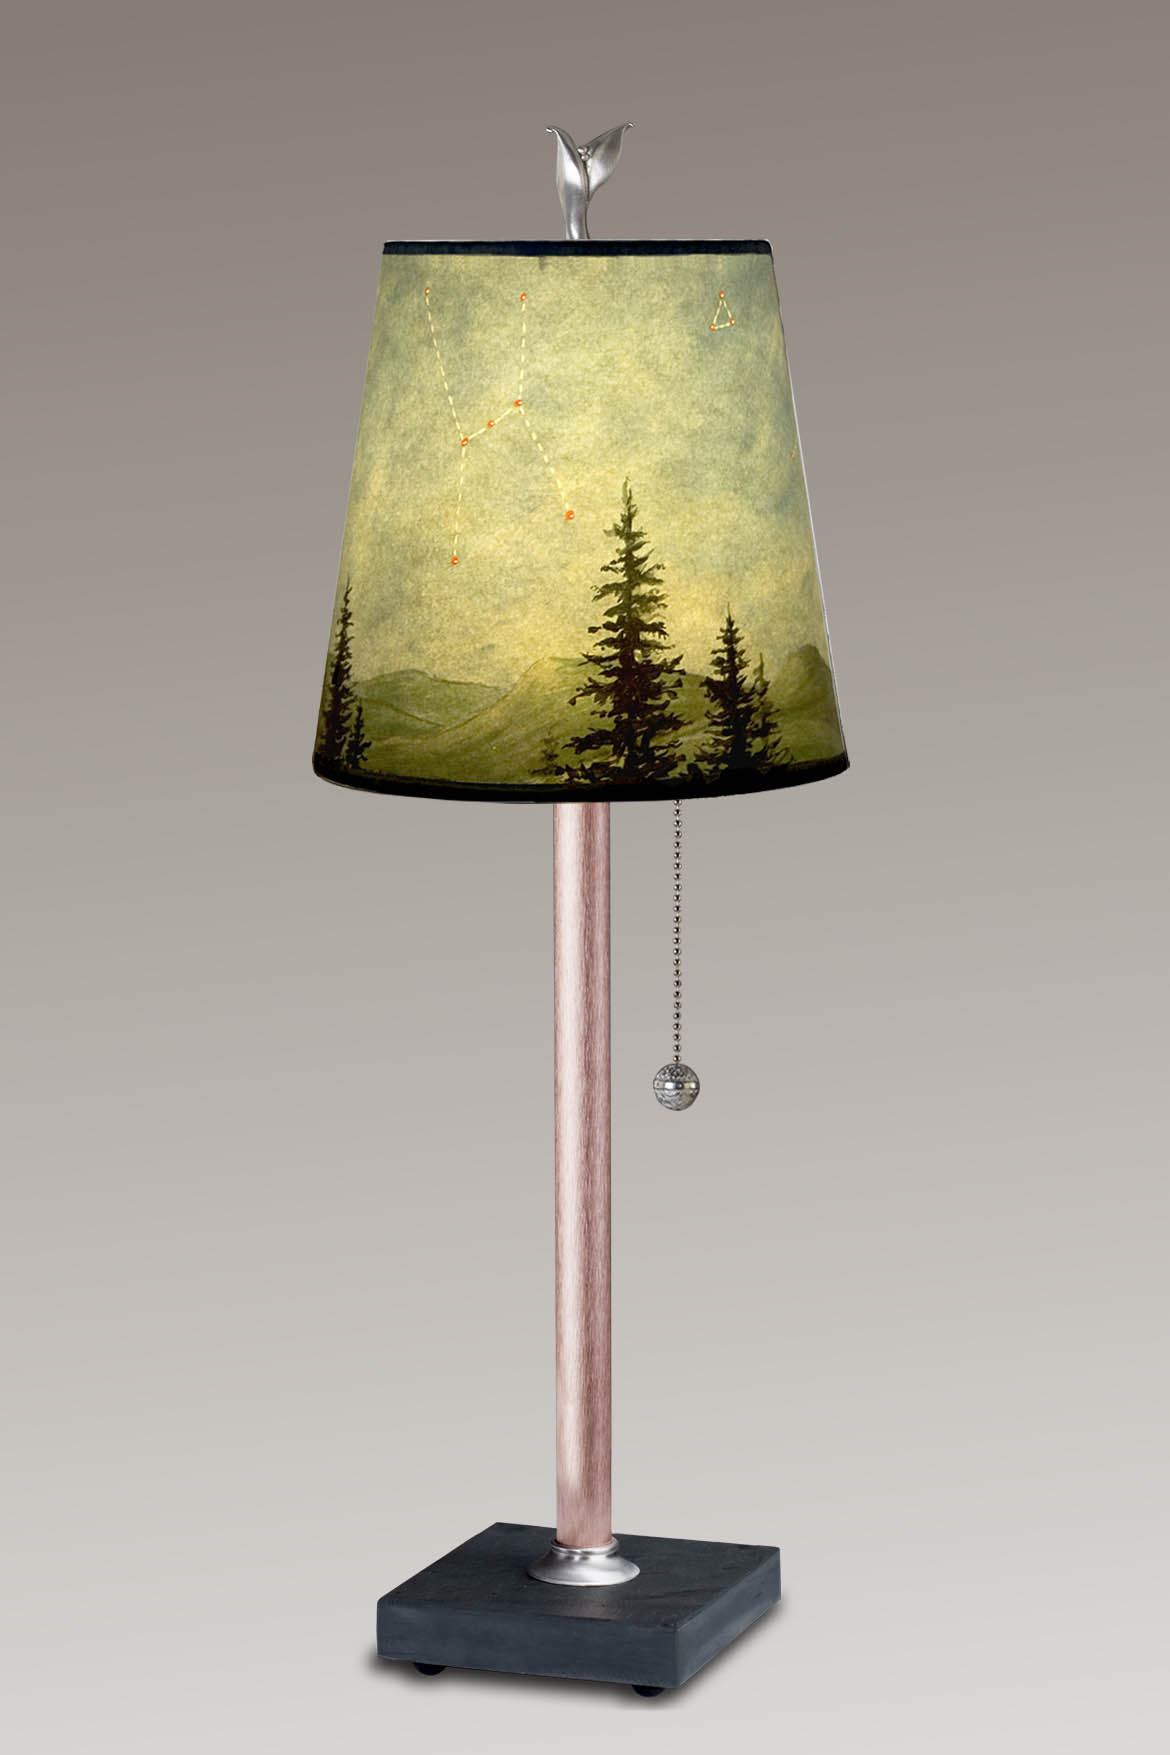 Janna Ugone & Co Table Lamps Copper Table Lamp with Small Drum Shade in Midnight Sky